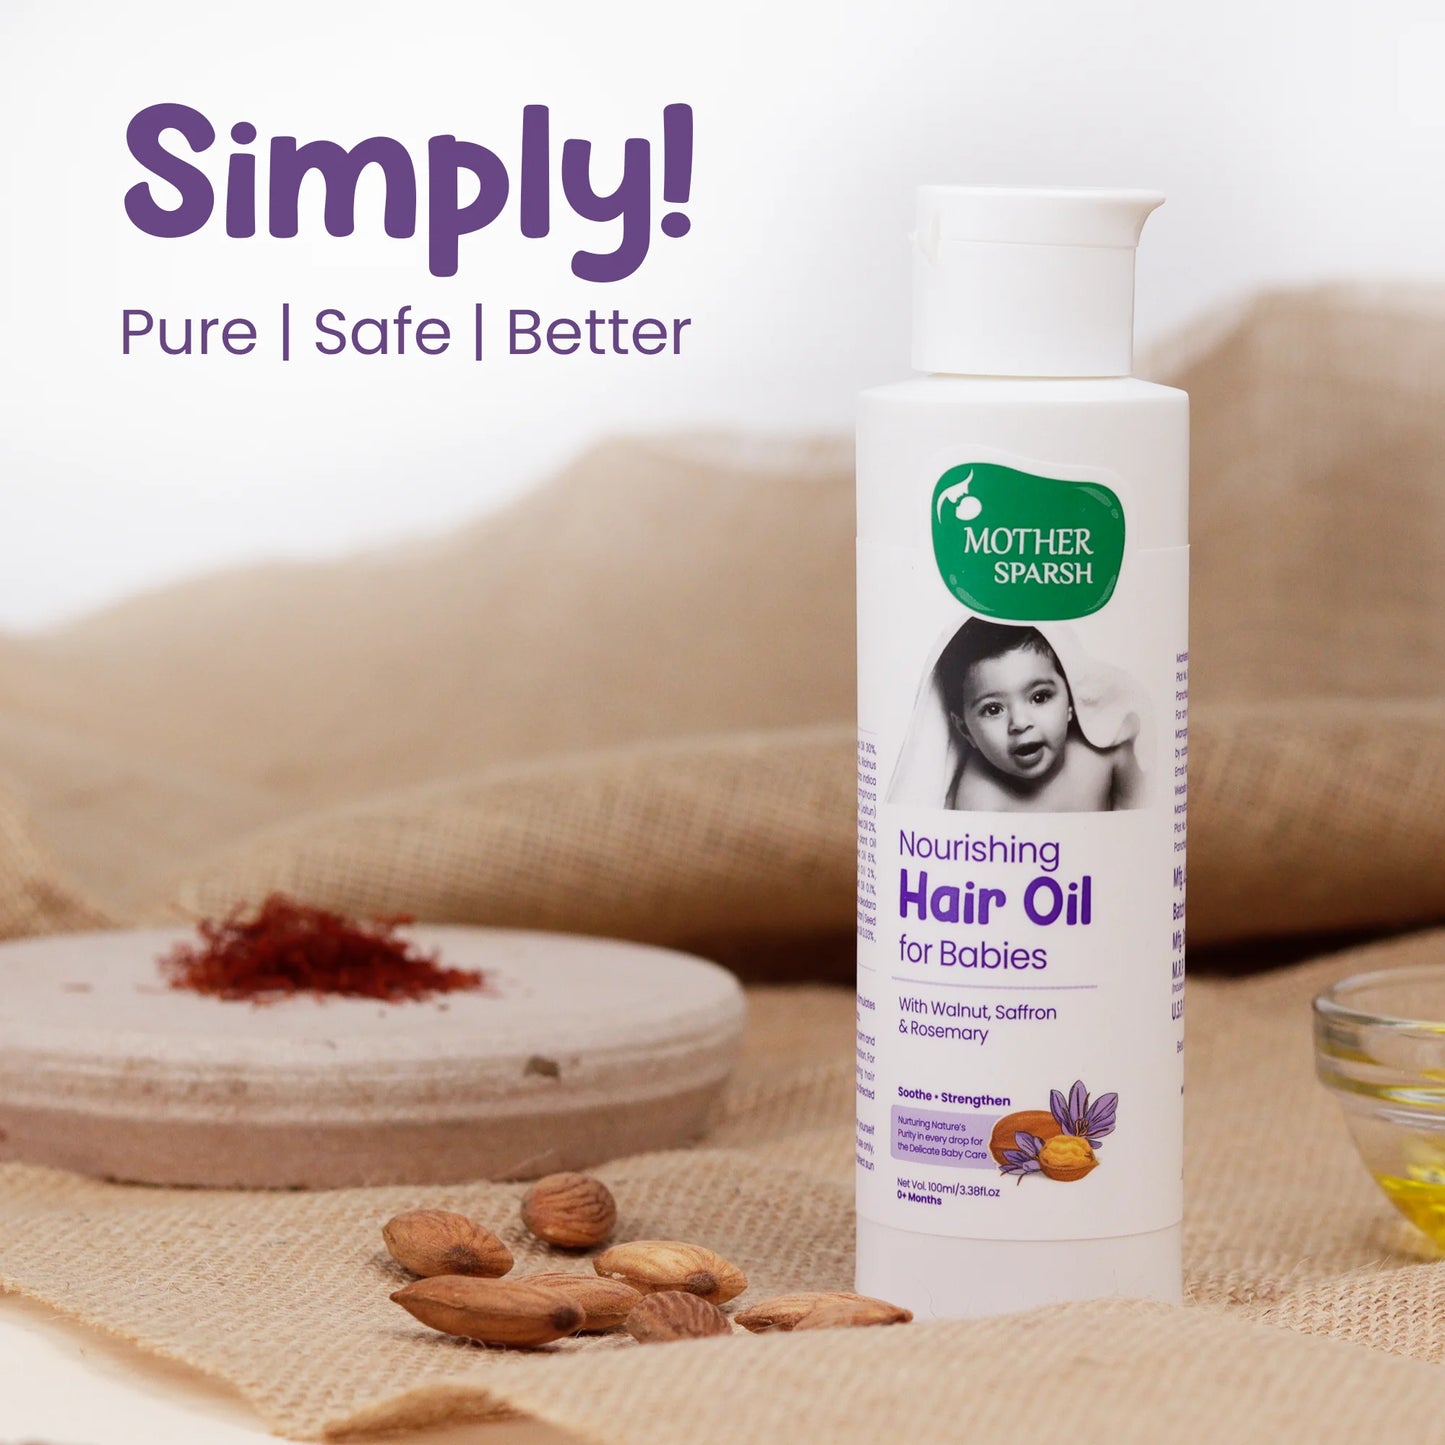 Simply-Pure-Safe-Better-Hair Oil for Baby 